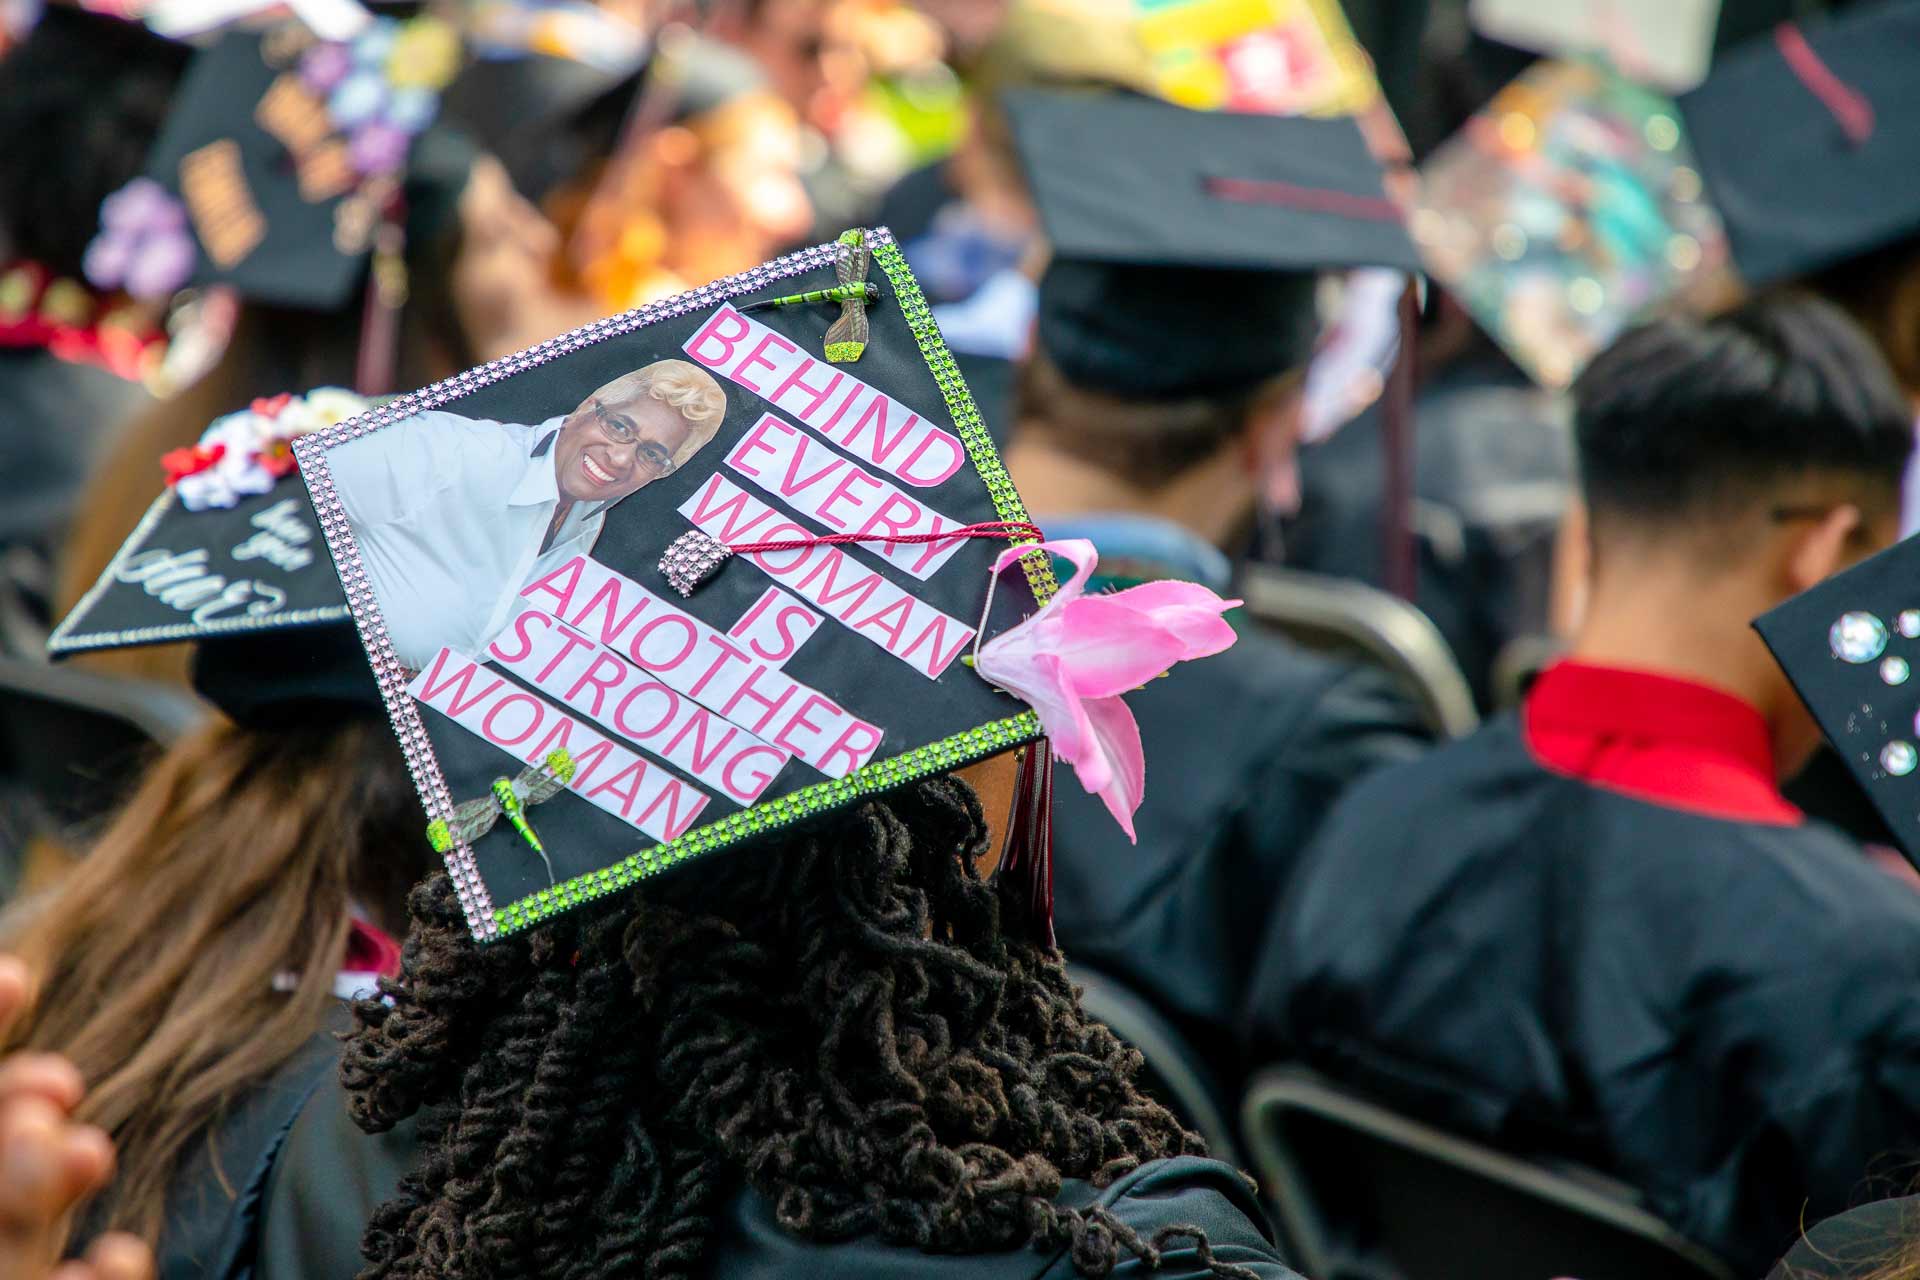 A student's mortar board reads, "Behind every woman is another strong woman."